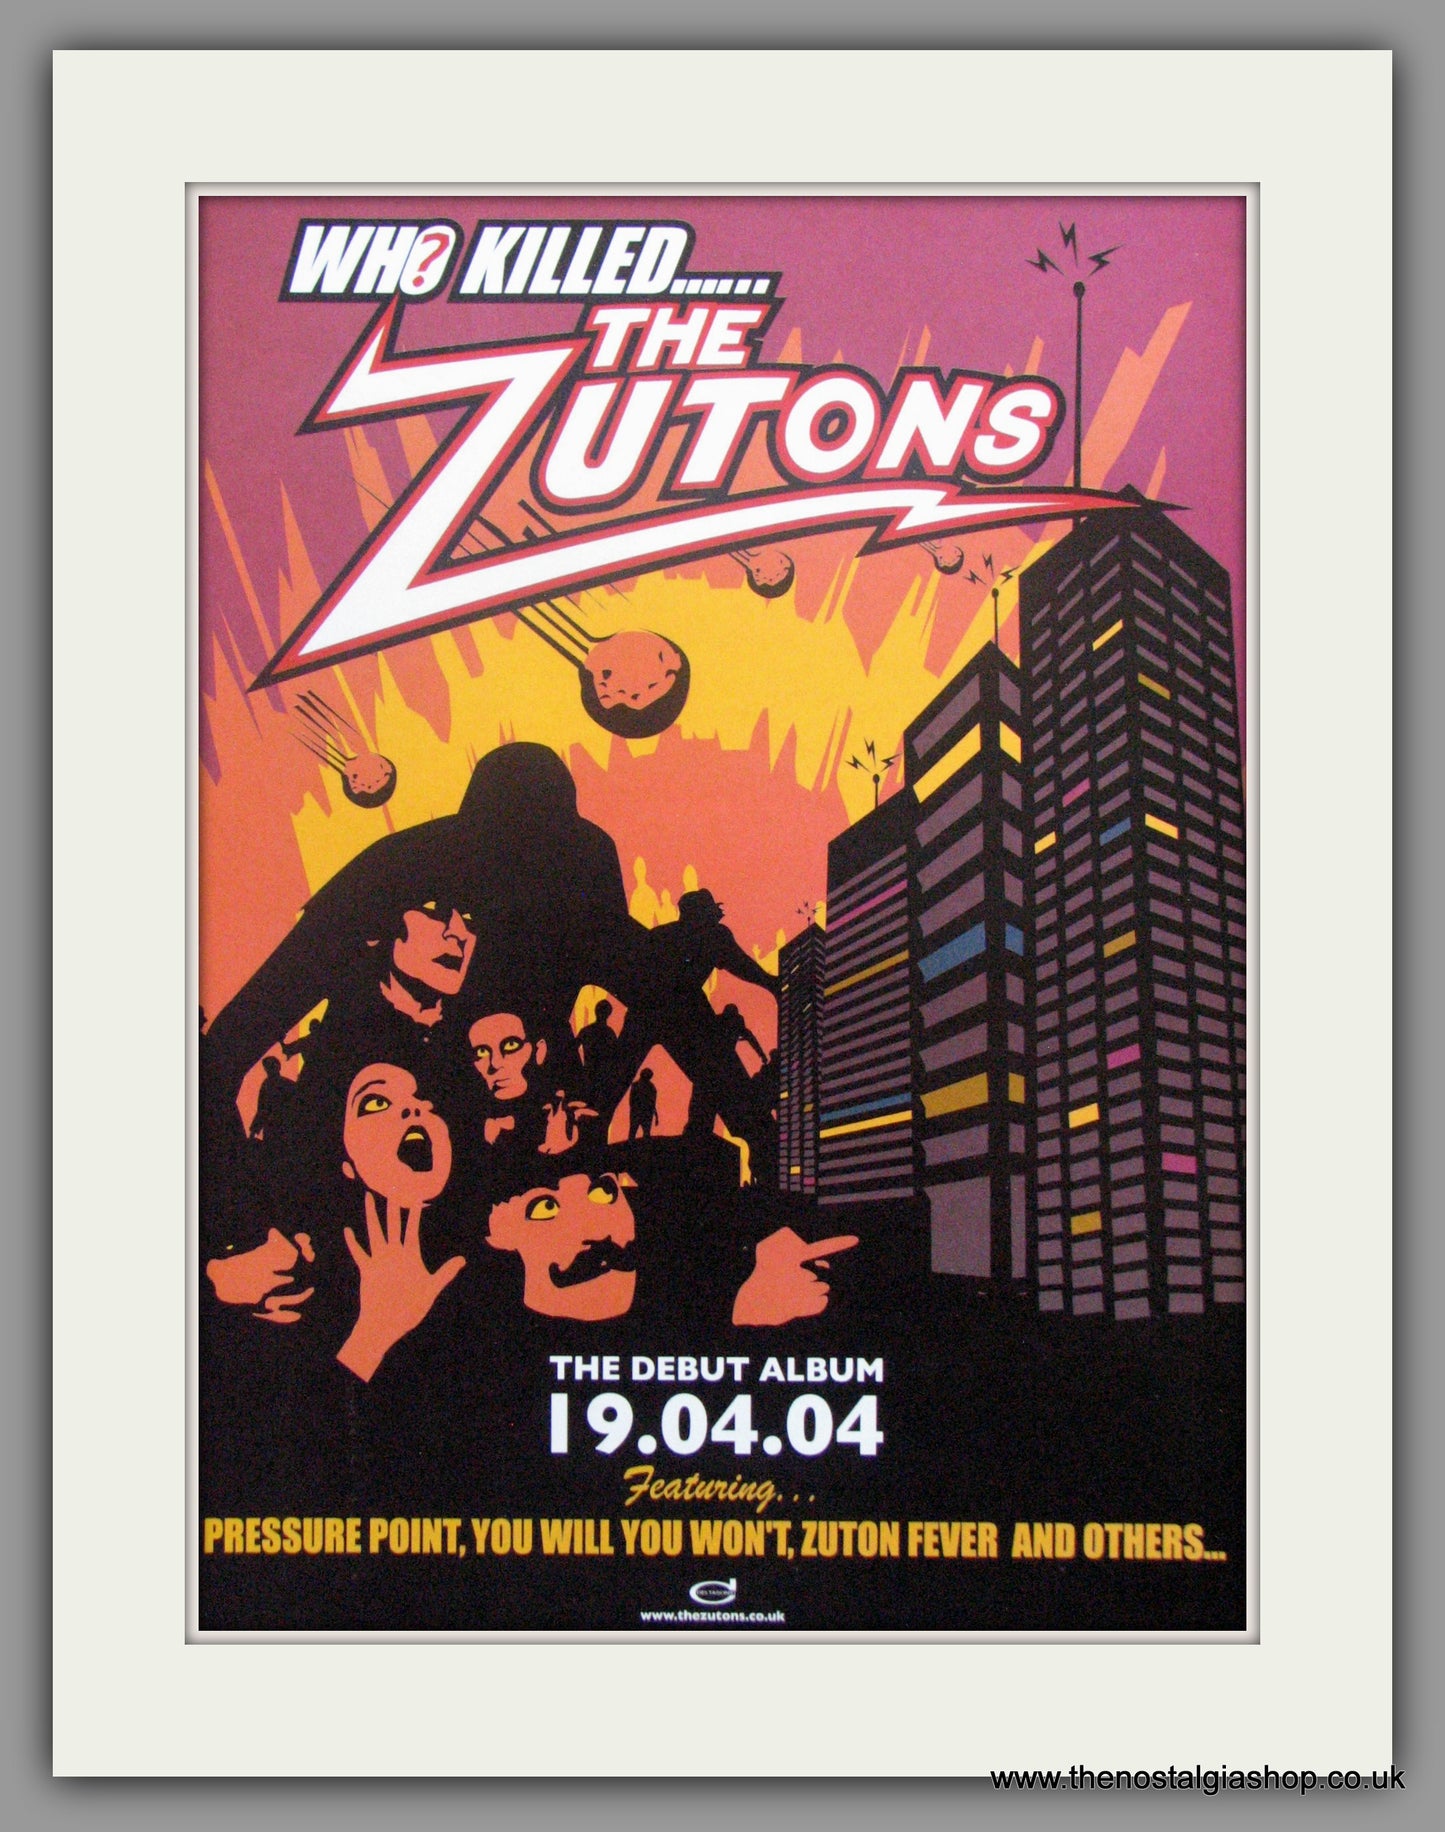 Zutons. Who Killed The Zutons. 2004 Original Advert (ref AD51617)